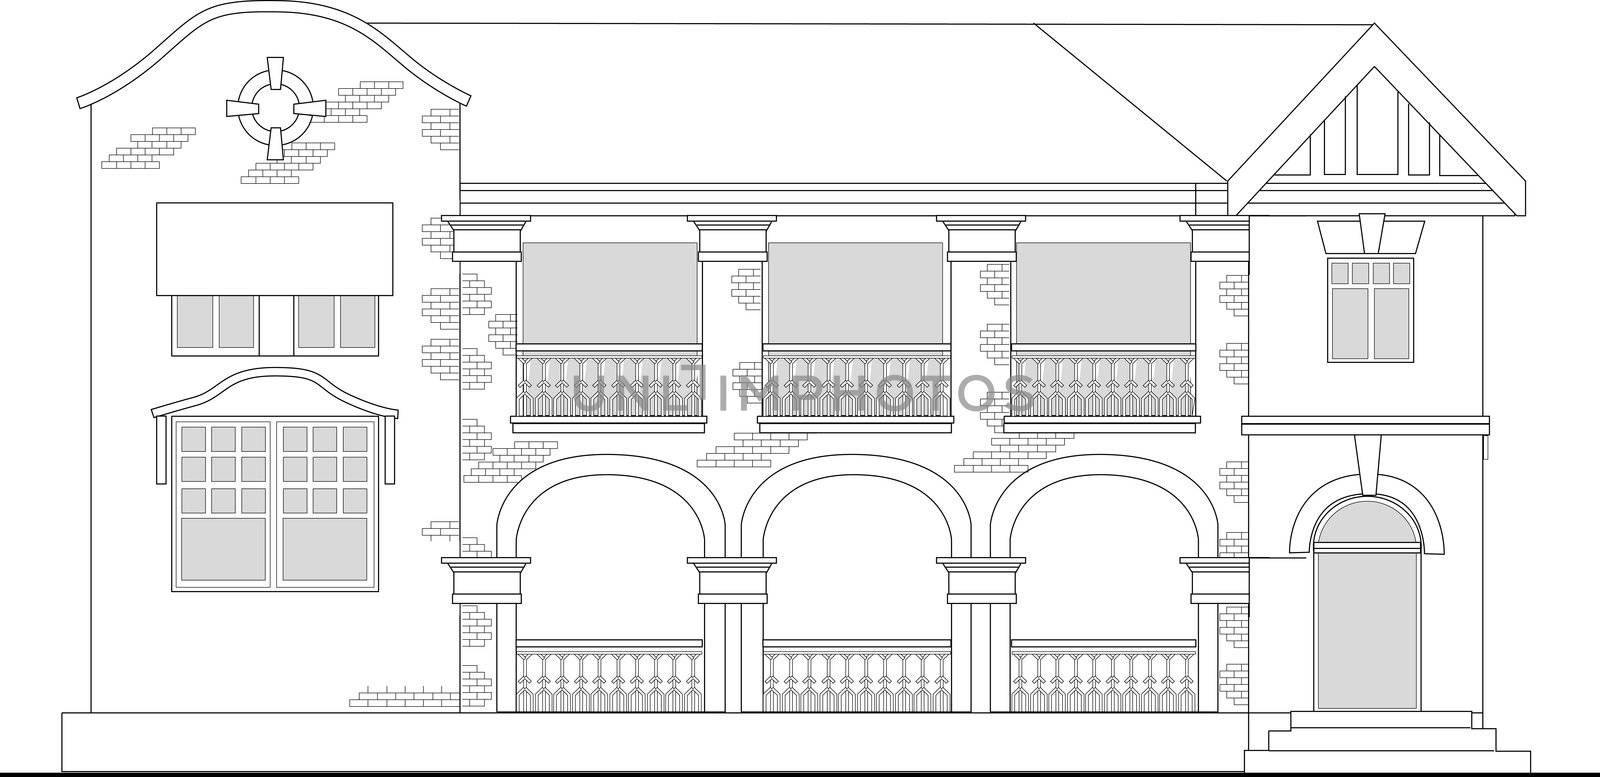 line drawing illustration of a commercial office building or shopping center building viewed from front elevation on white background